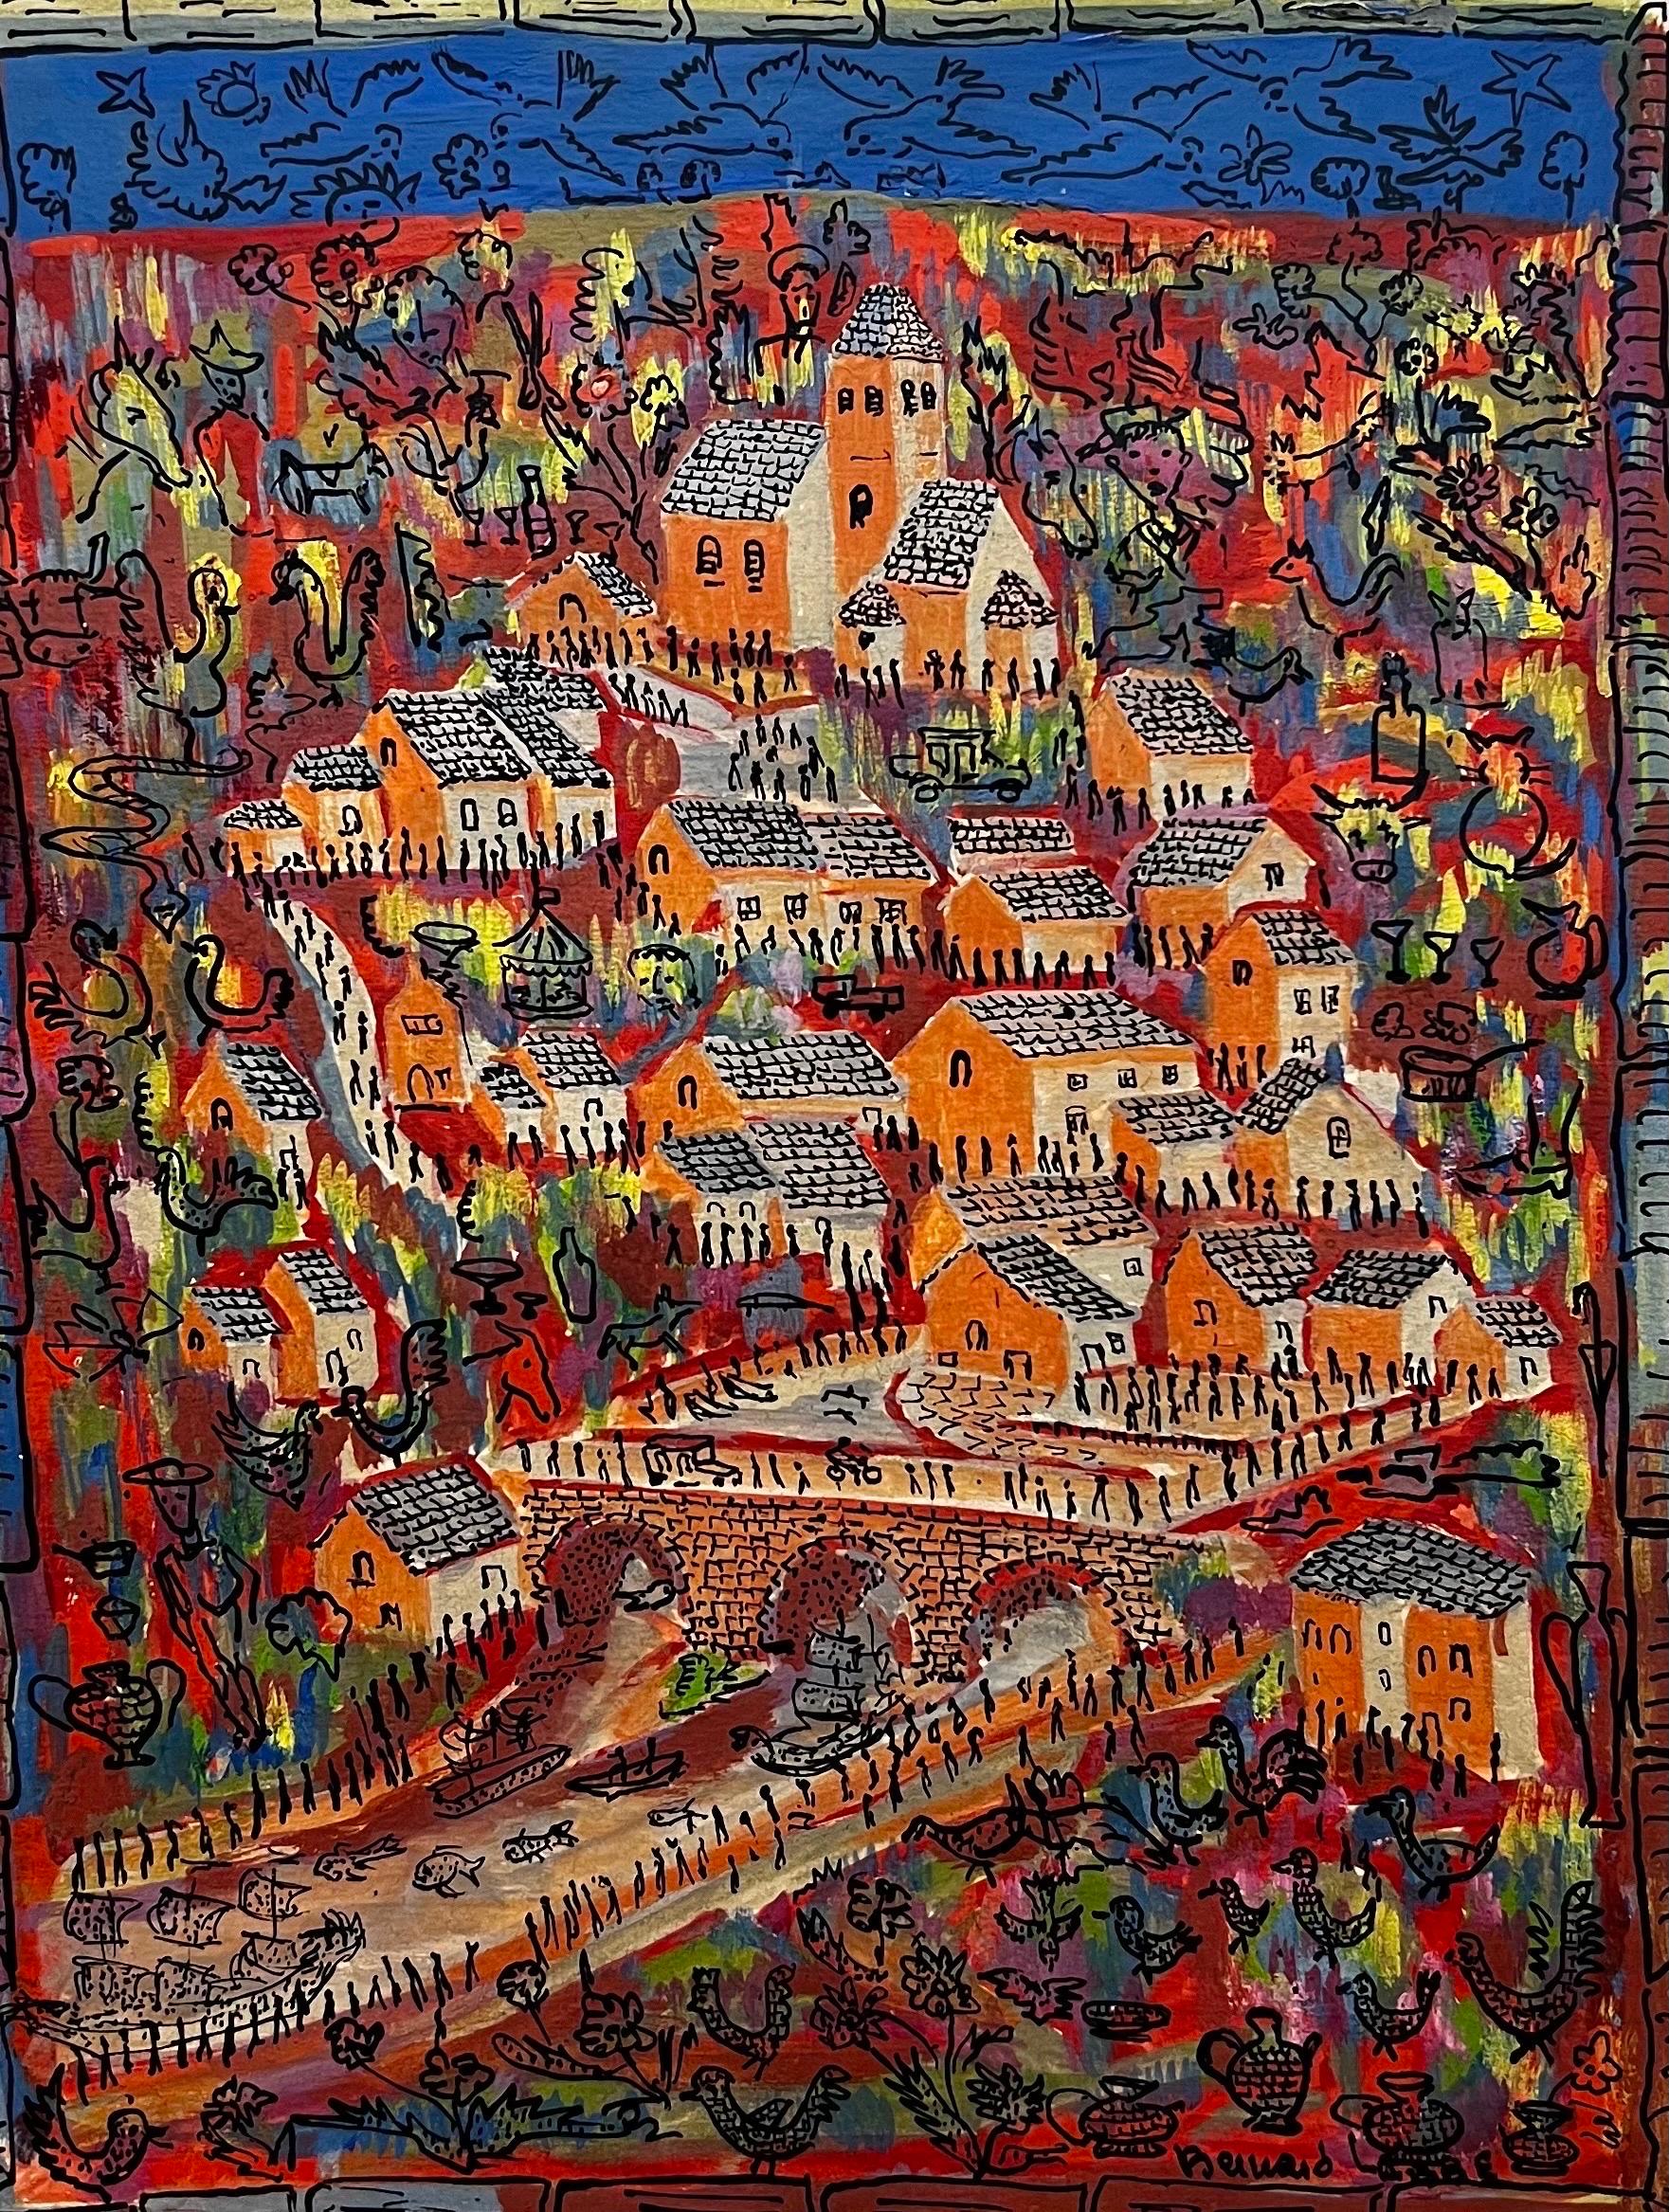 Bernard Labbe Figurative Art - 1950's Modernist/ Cubist Painting - Colourful and Wacky Busy Town